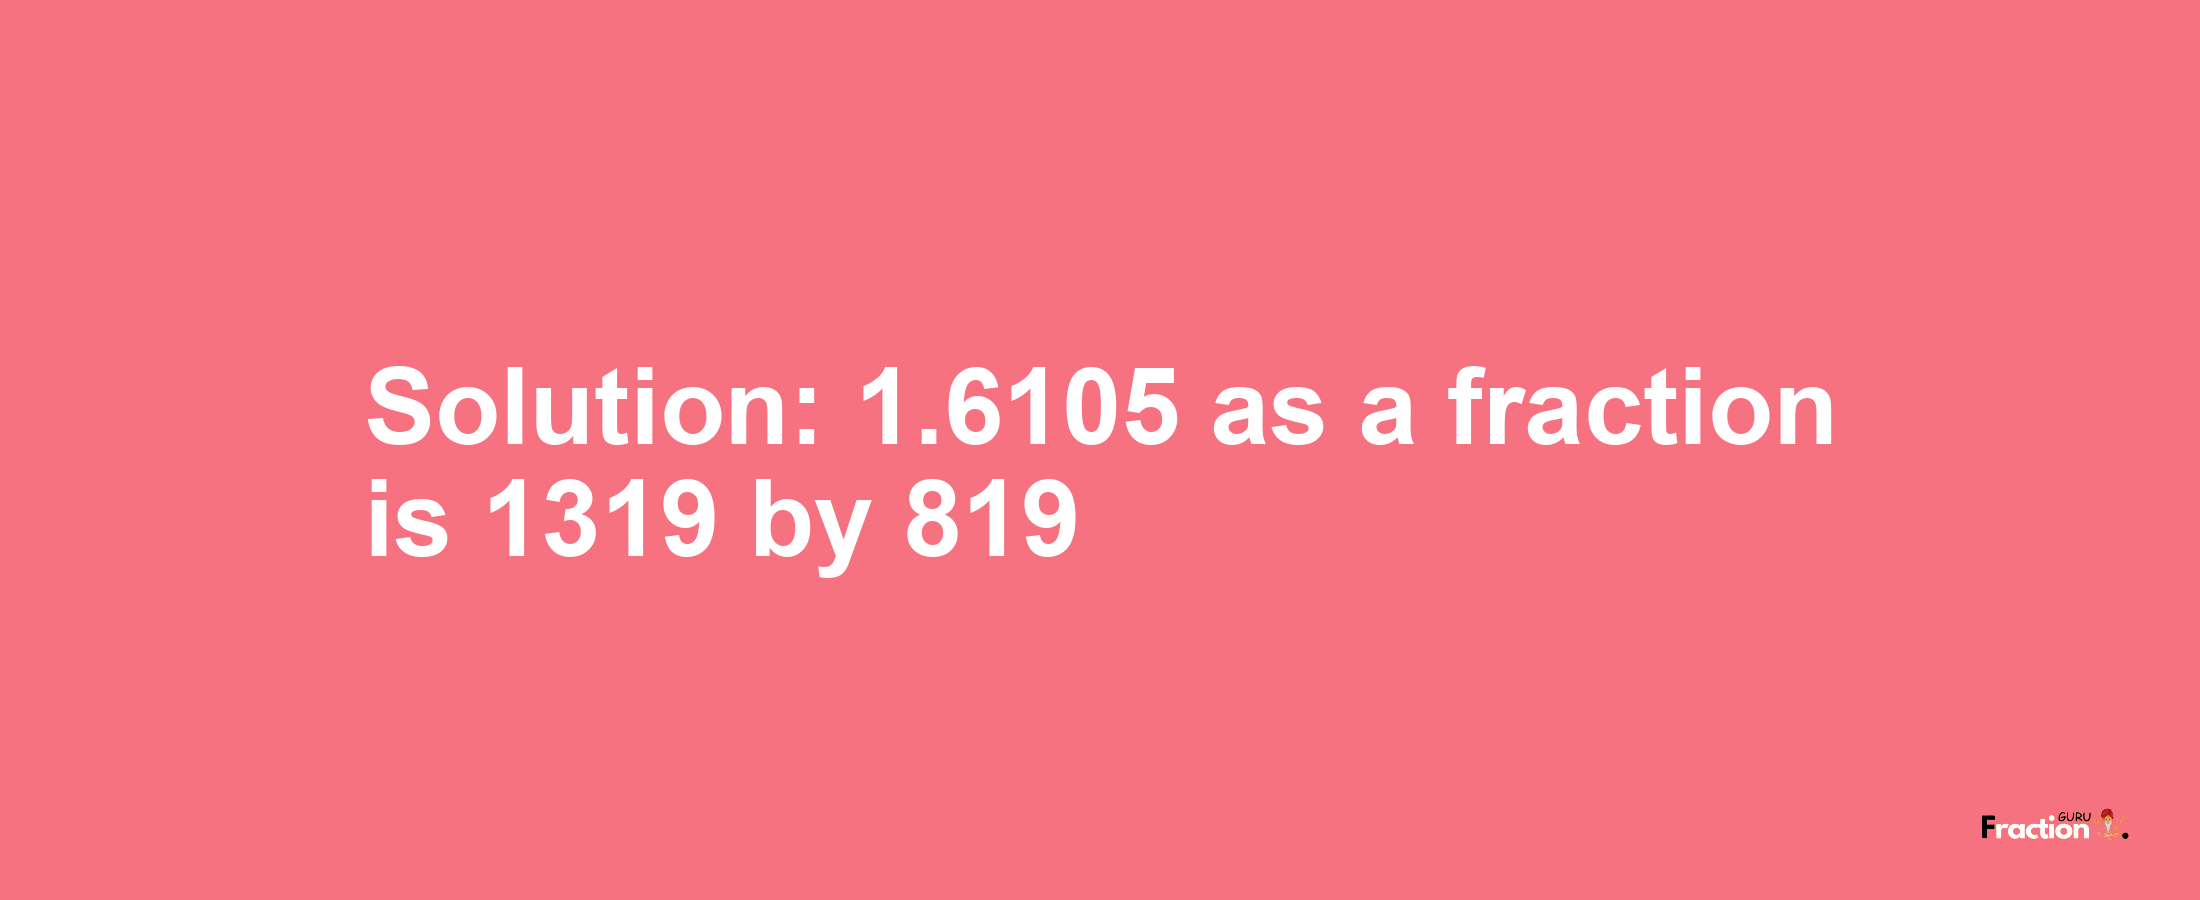 Solution:1.6105 as a fraction is 1319/819